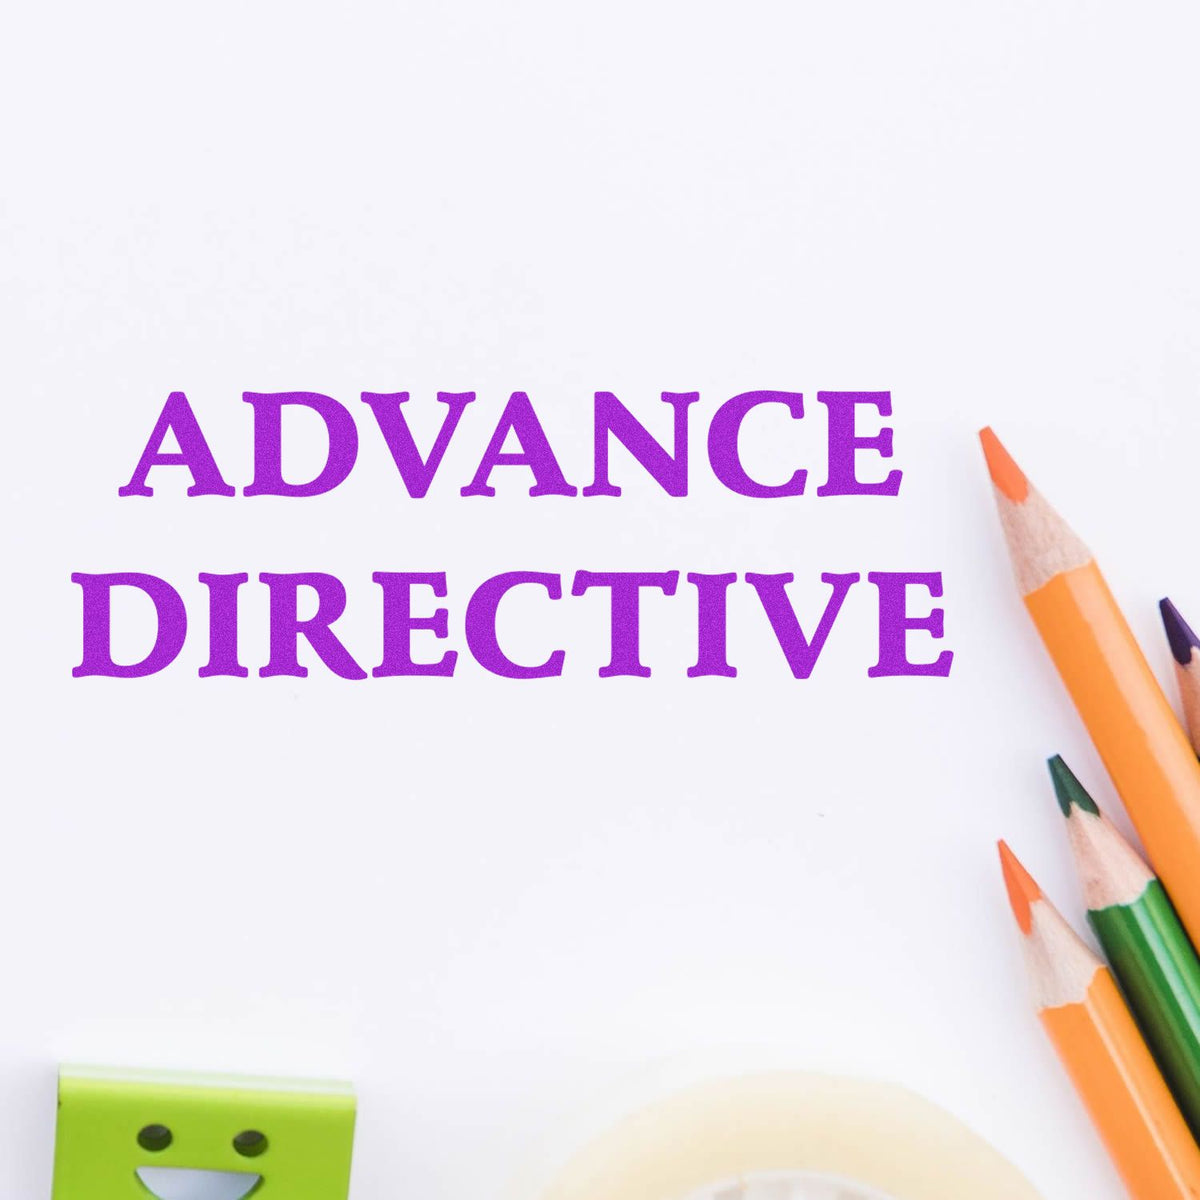 Large Advance Directive Rubber Stamp In Use